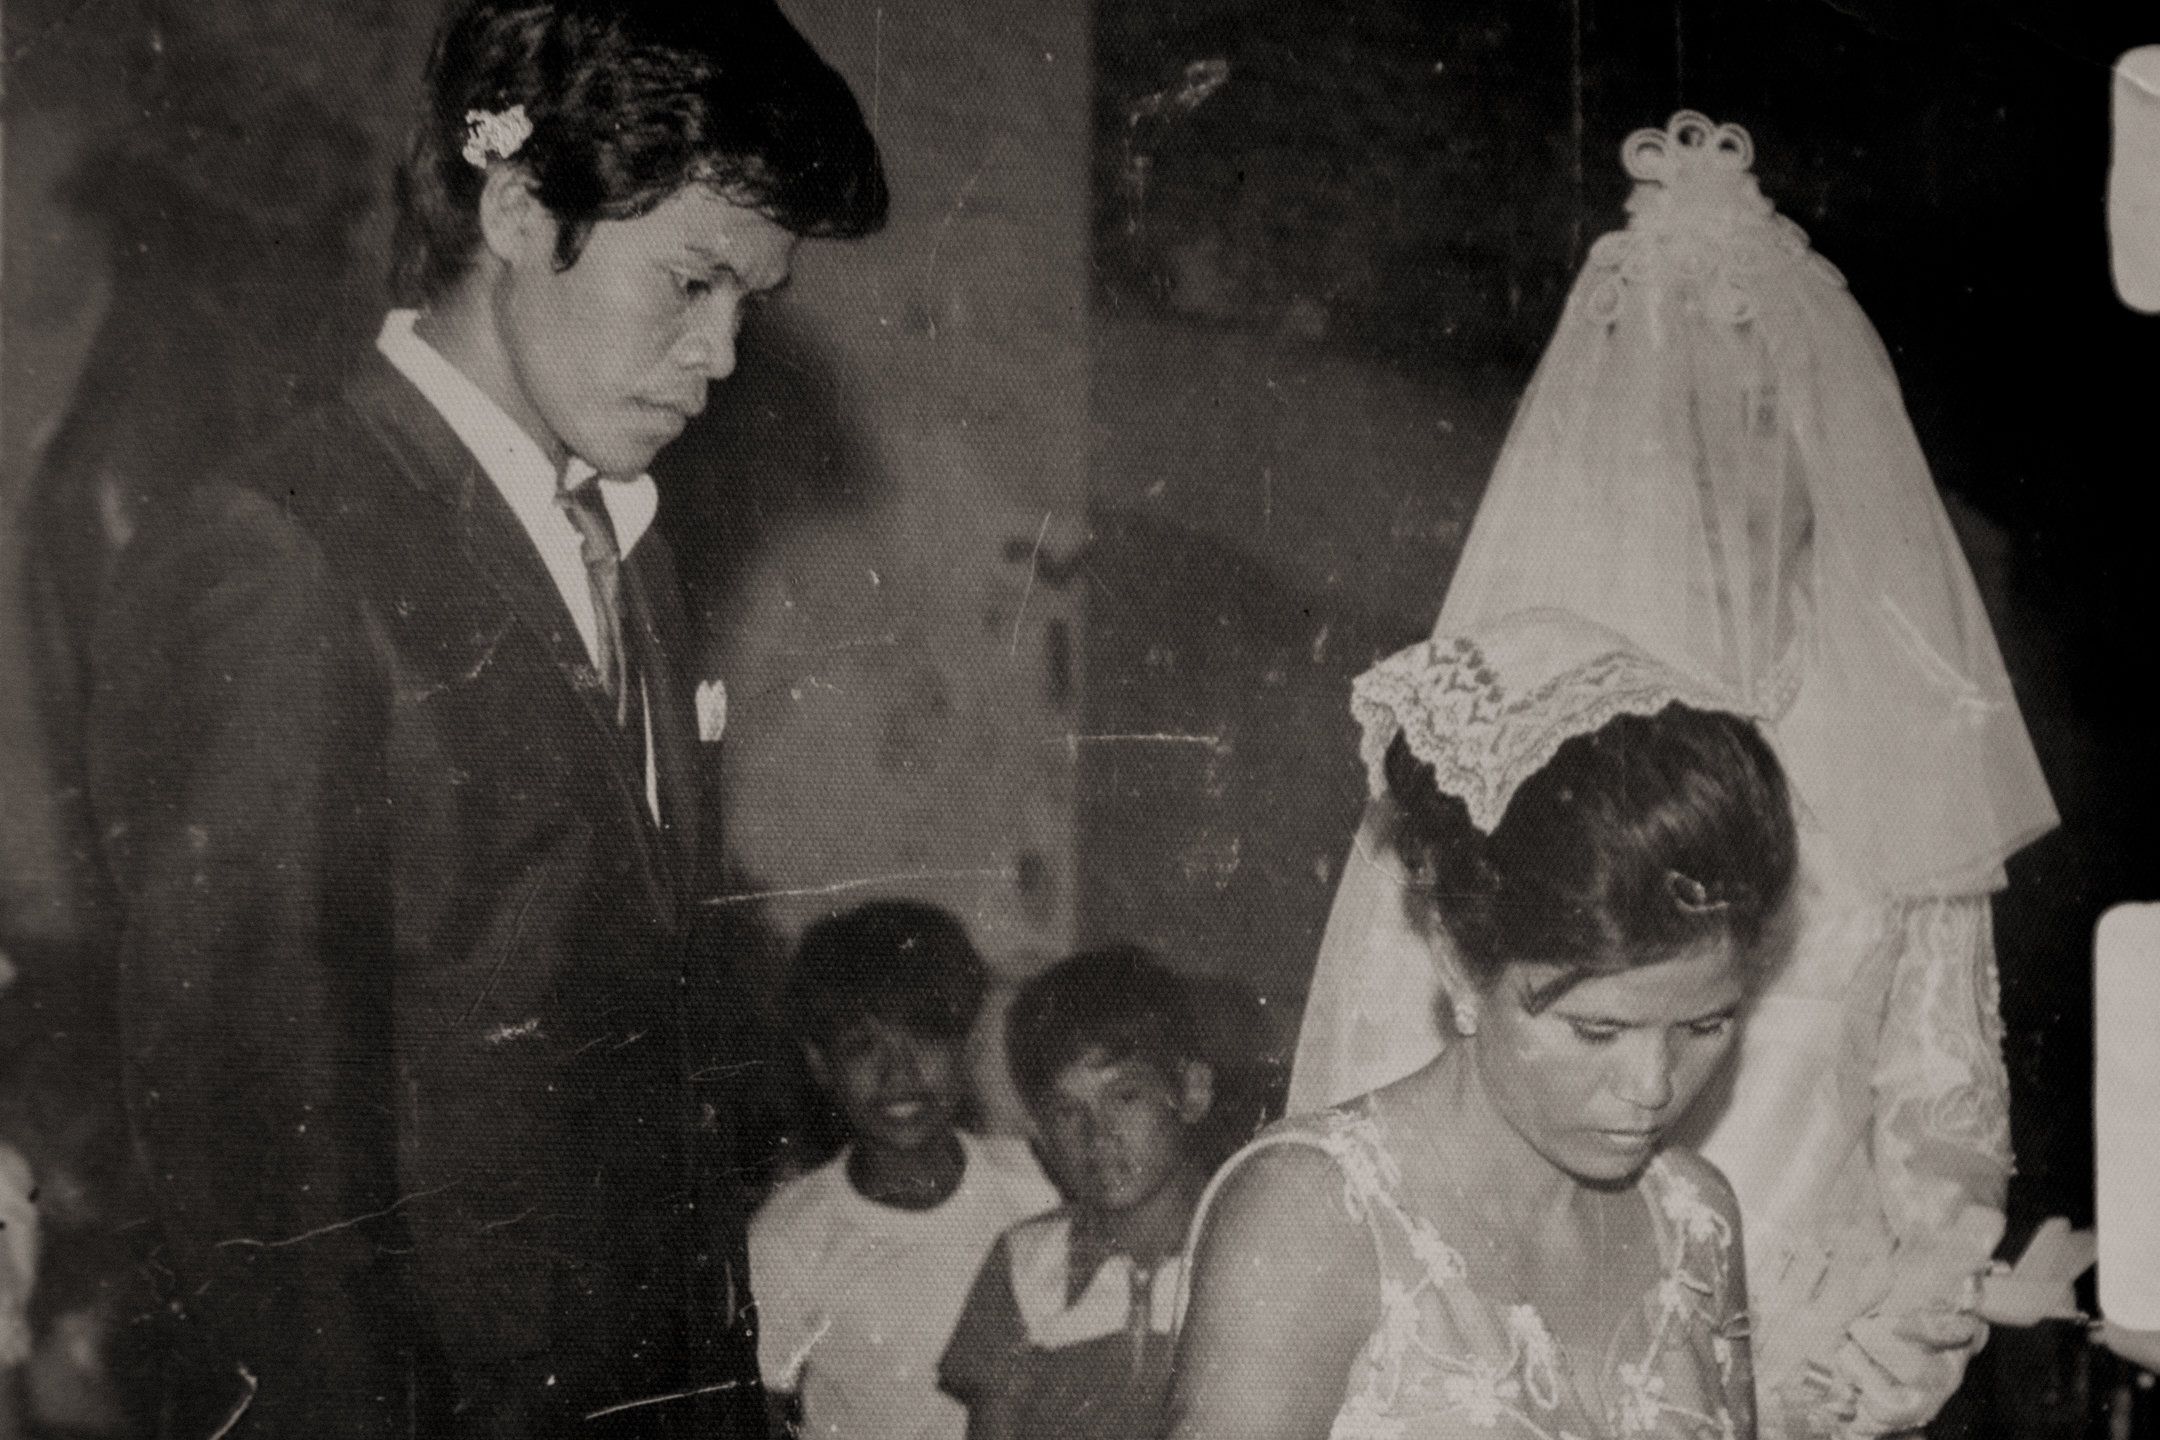 "I didn't want to get married initially, because of what happened at the Red House," said Cefirina Lapuz Turla, referring to the location of a mass rape by Japanese soldiers in 1944. "And then I married my childhood friend, a neighbor. I promised to make him wait for 10 years, but then it was eight years ... because he was insistent and because I also liked him. My parents also liked him."  Image by Cheryl Diaz Meyer. Philippines, 2019.